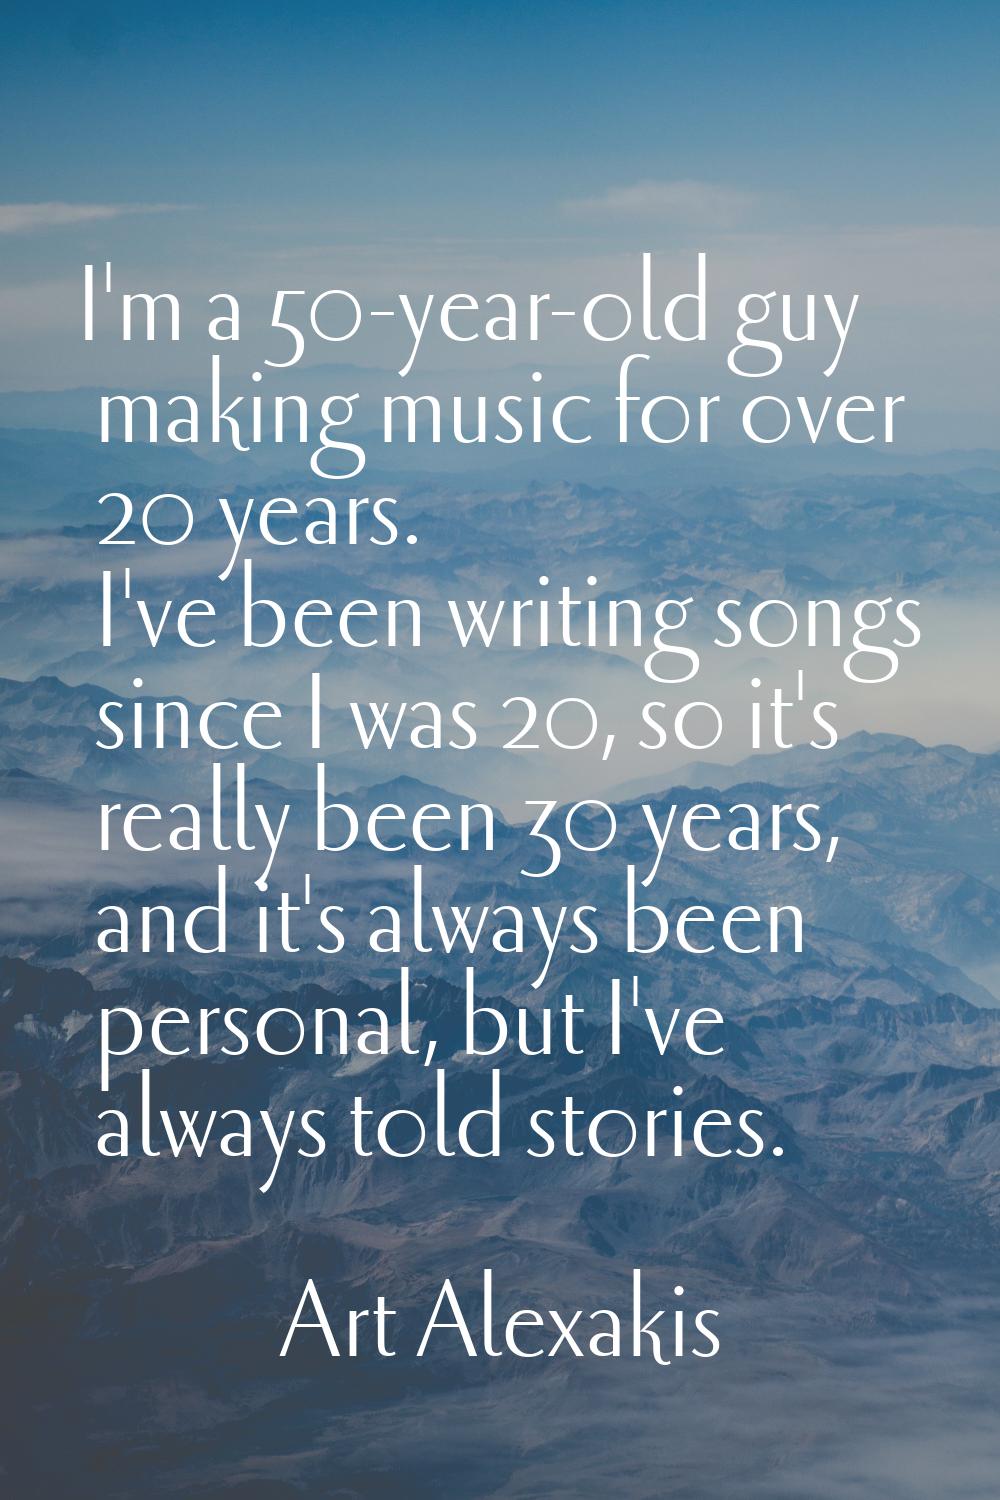 I'm a 50-year-old guy making music for over 20 years. I've been writing songs since I was 20, so it